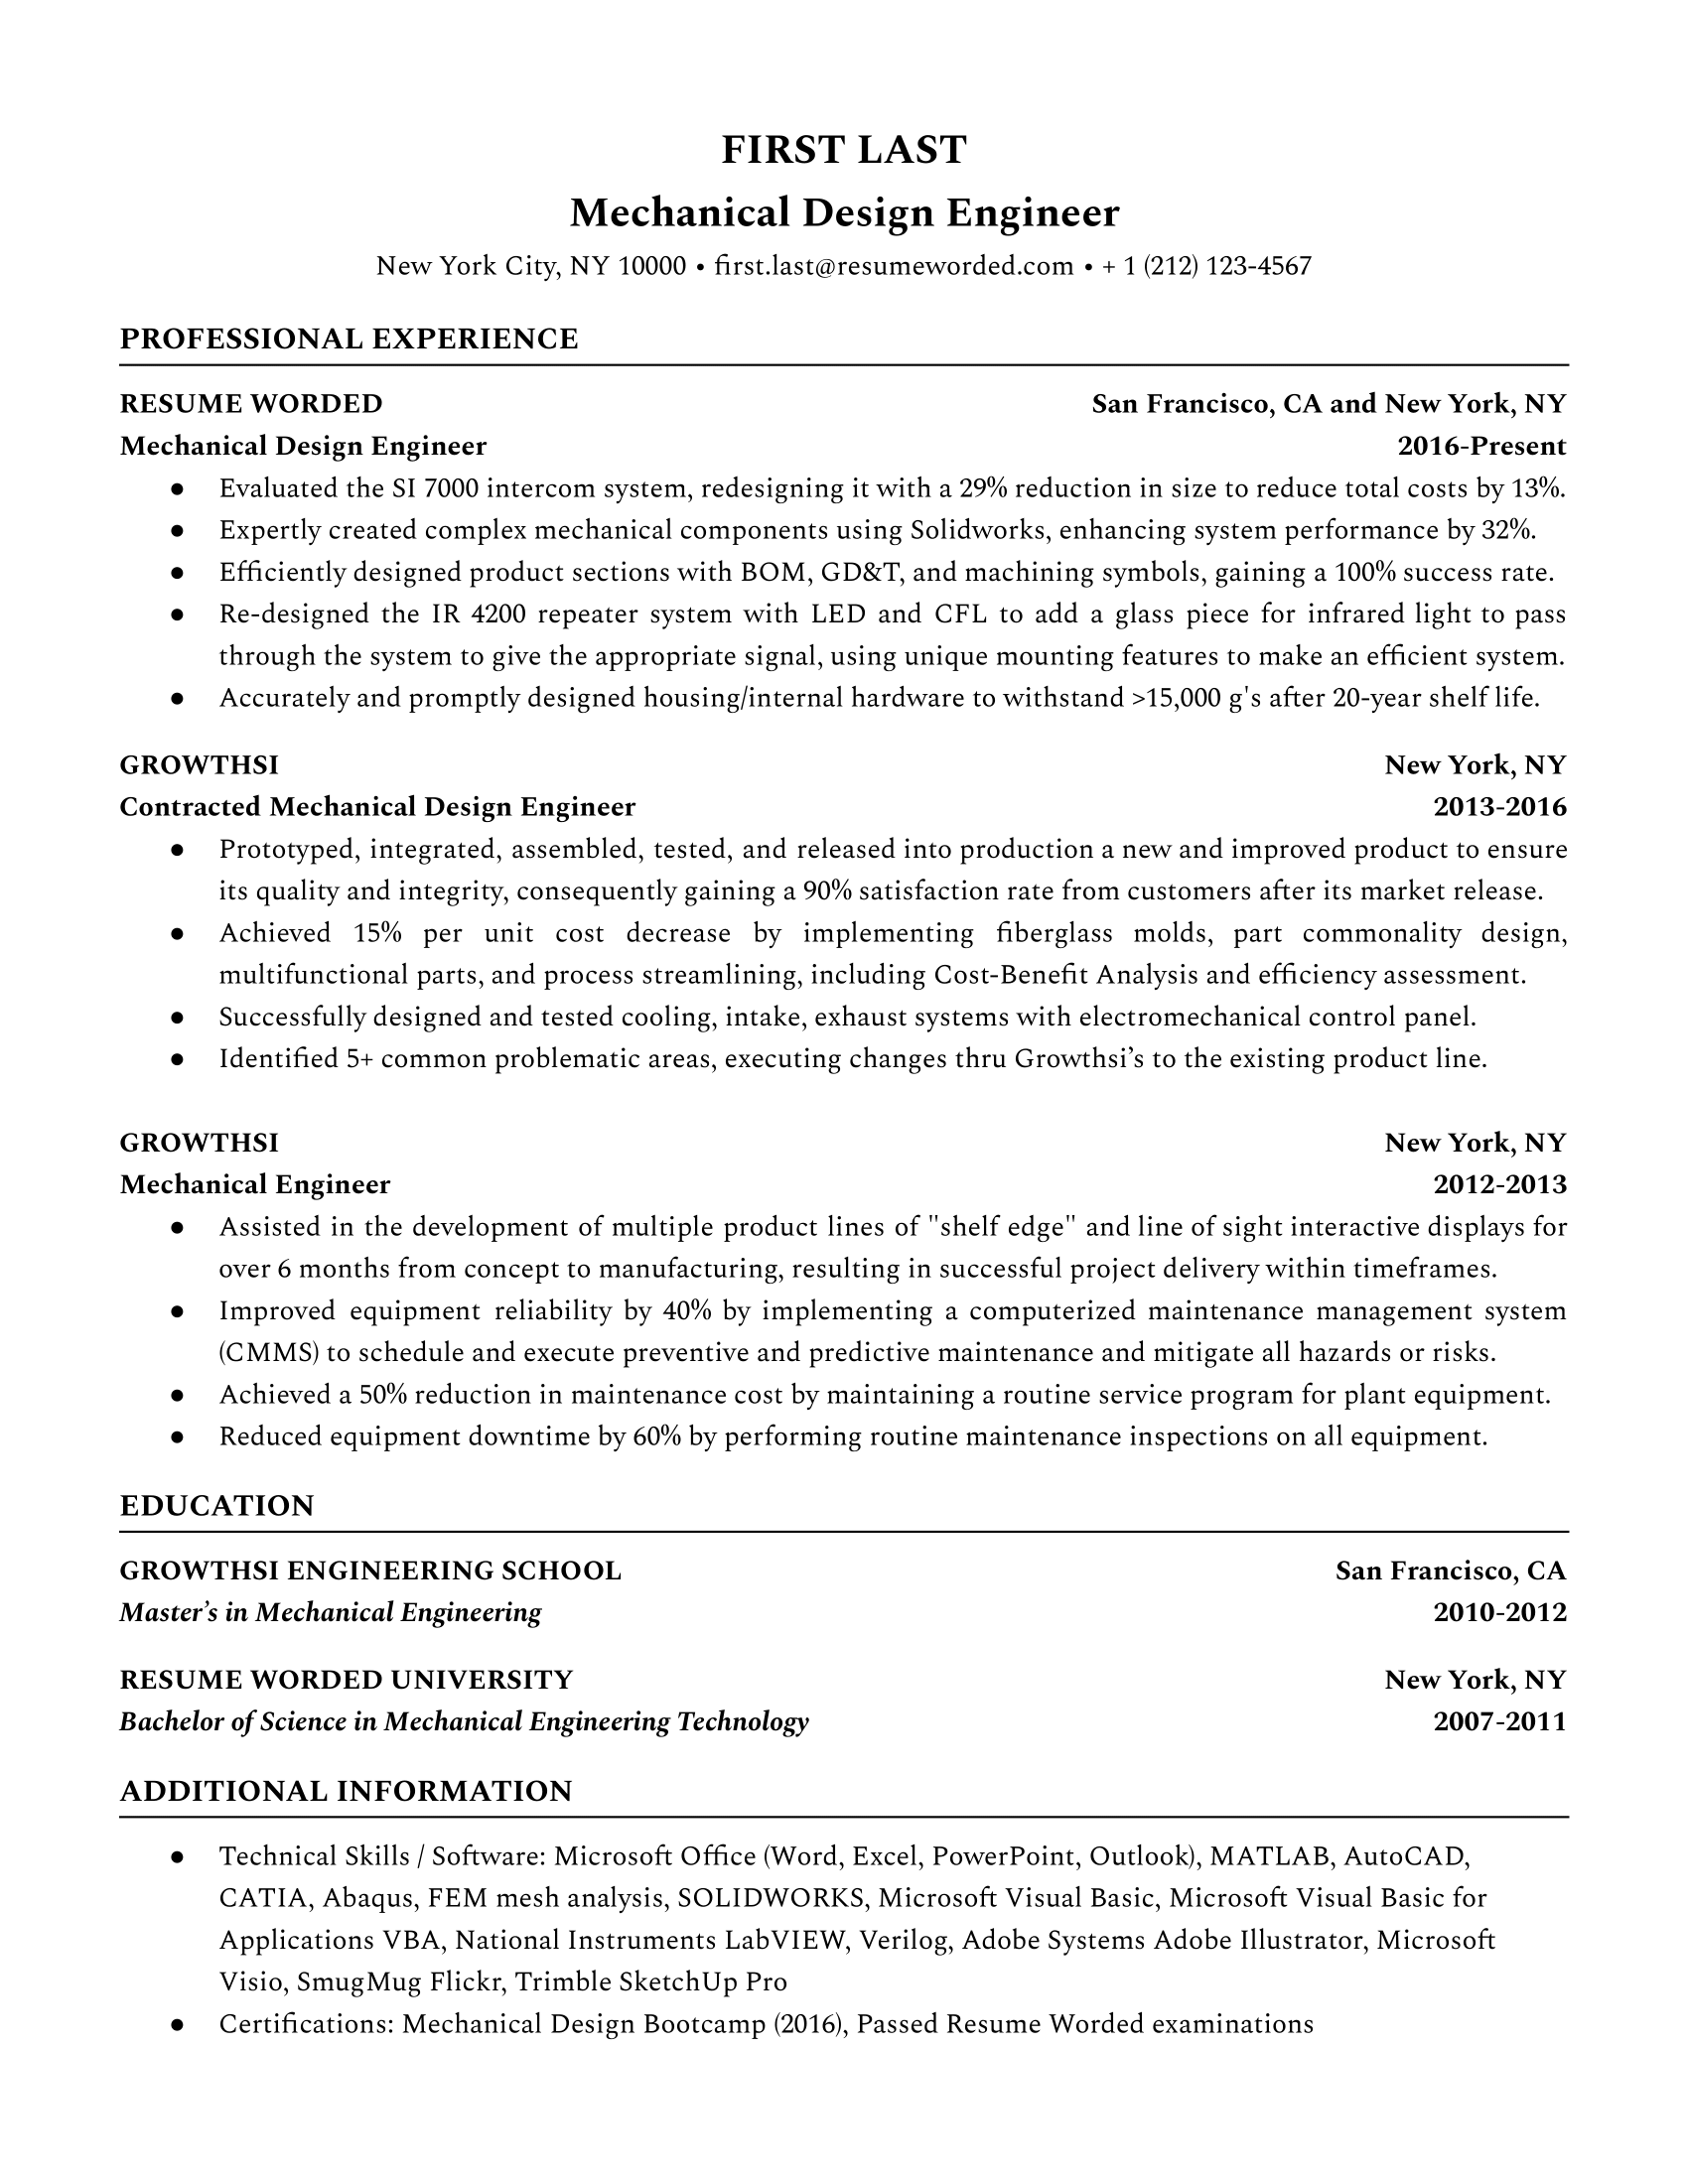 A resume for a mechnical design engineer with a master's in mechnical engineering and experience as a mechanical engineer.